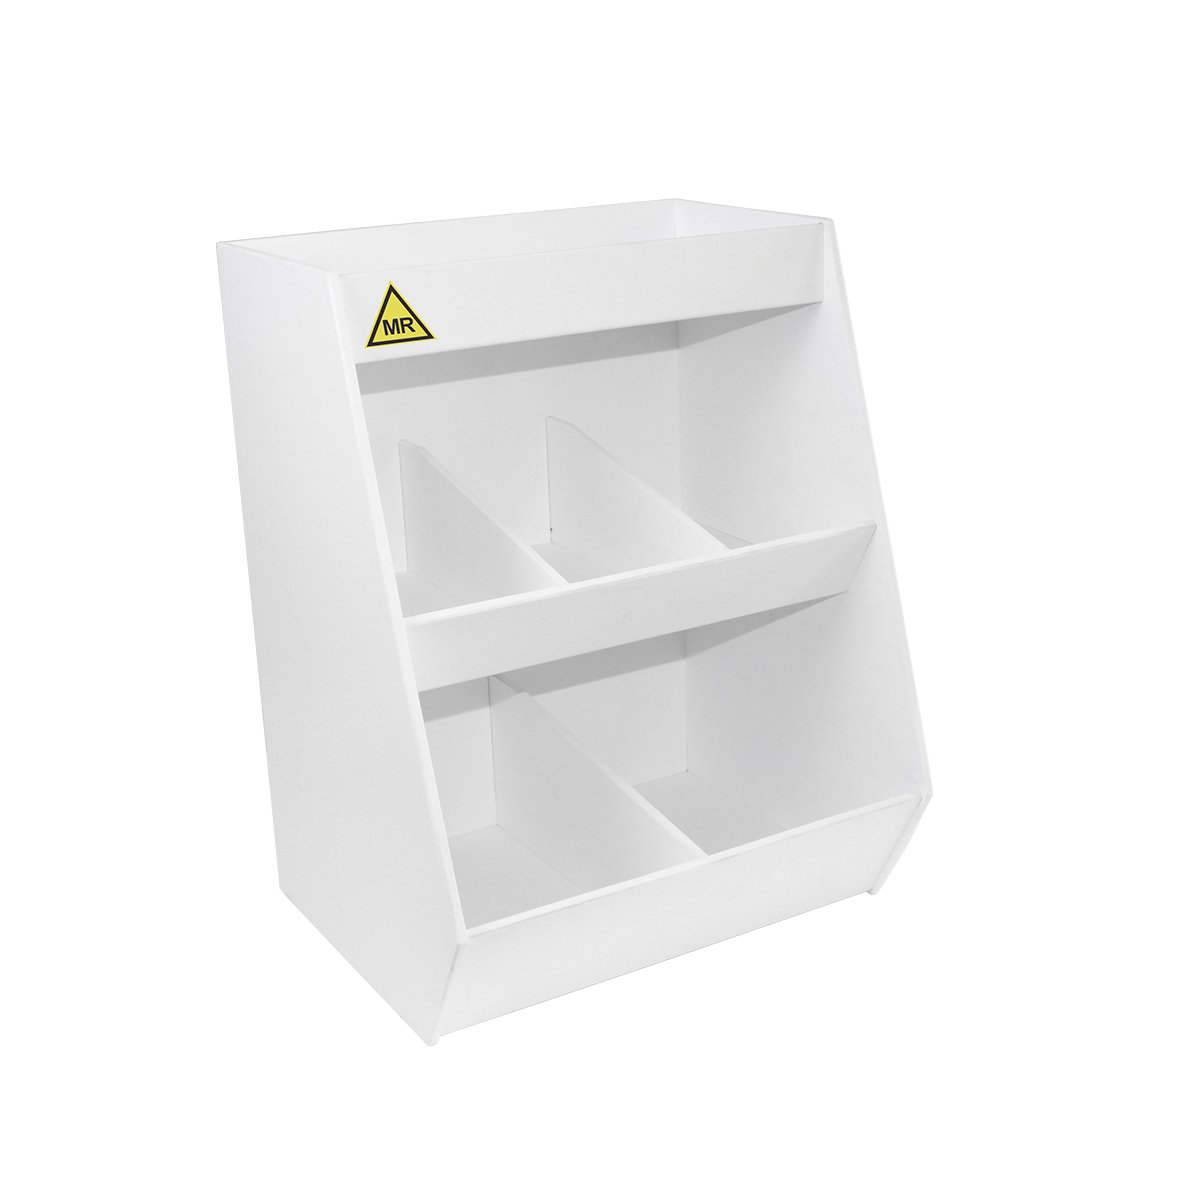 24 Width x 10 Height x 7 Depth TrippNT 50487 PVC Straight Double Safety Shelves White 